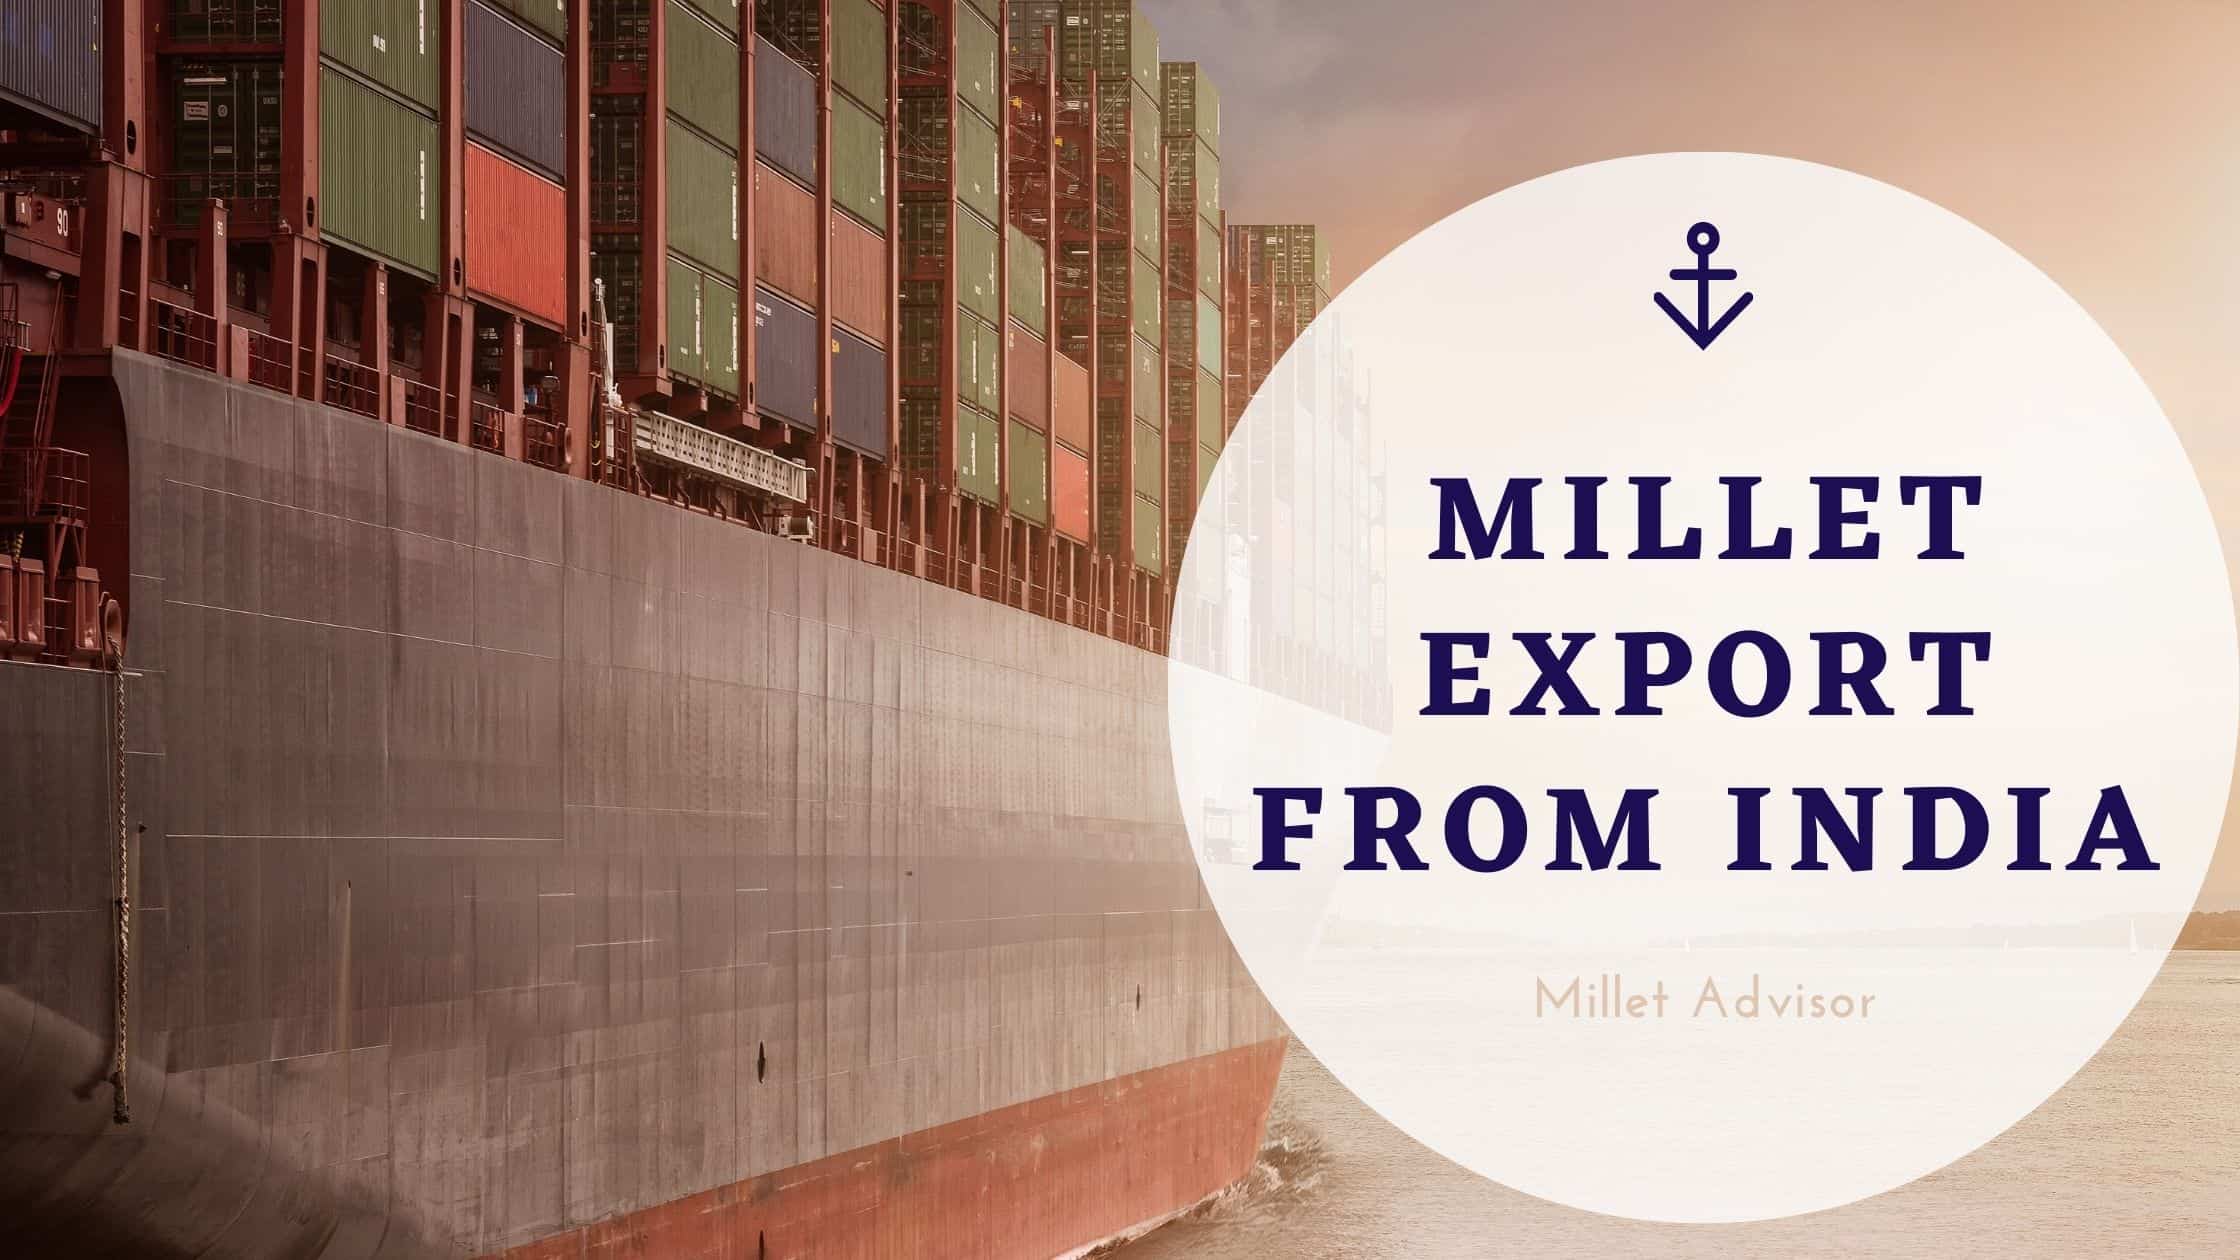 Millet Export from India